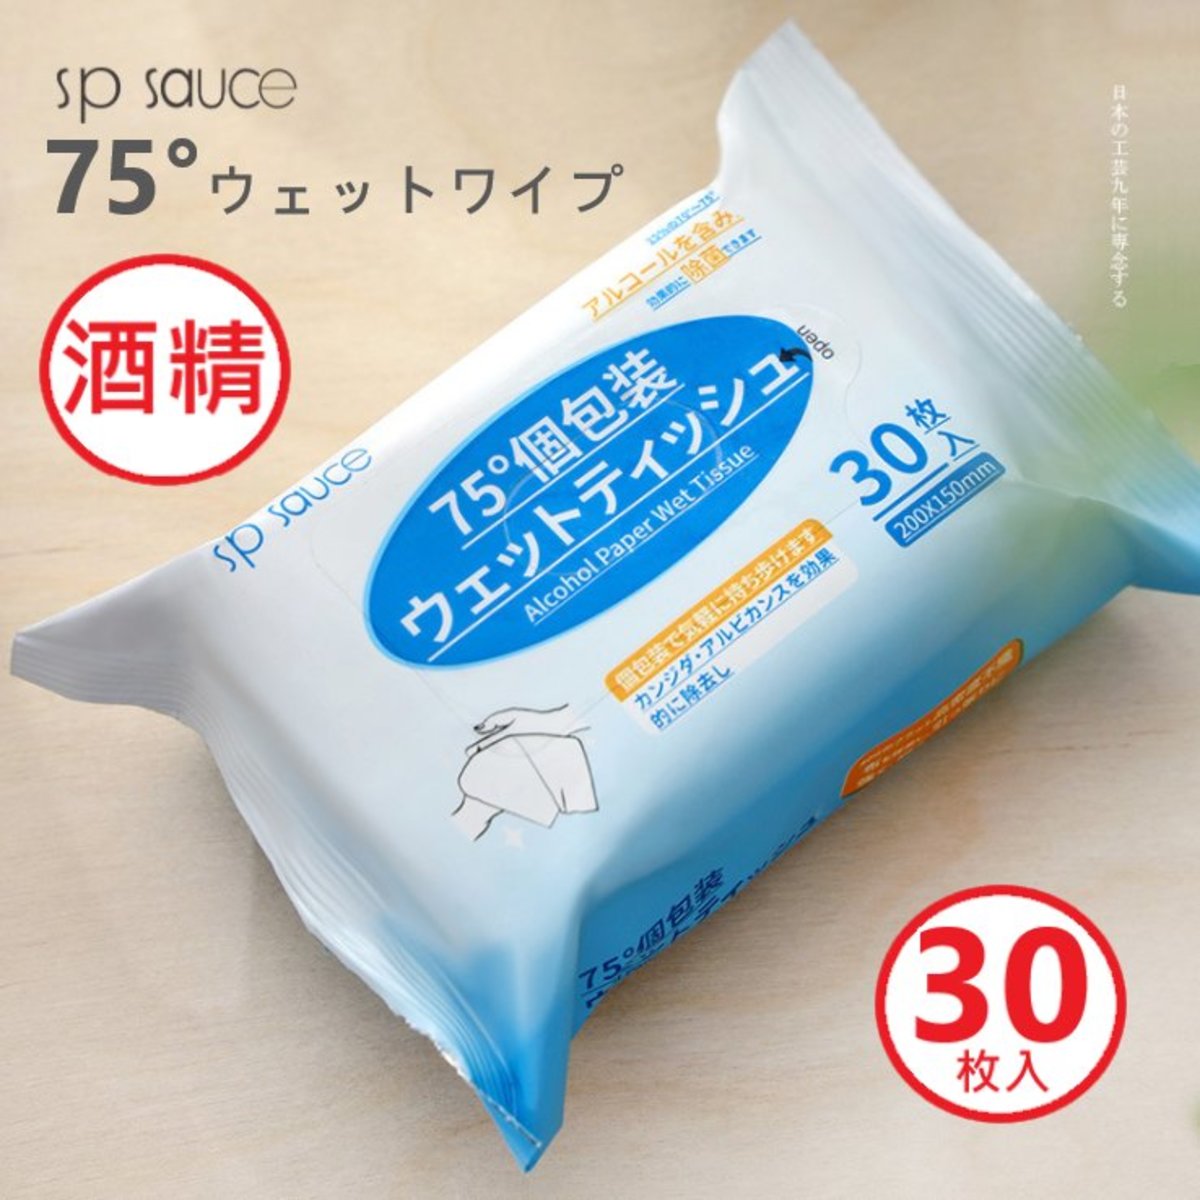 Sp Sauce Bag Japan 75 Alcohol Disinfecting Wipes Sterile Alcohol Pad X 1 Bag 30 Sheets Hktvmall The Largest Hk Shopping Platform